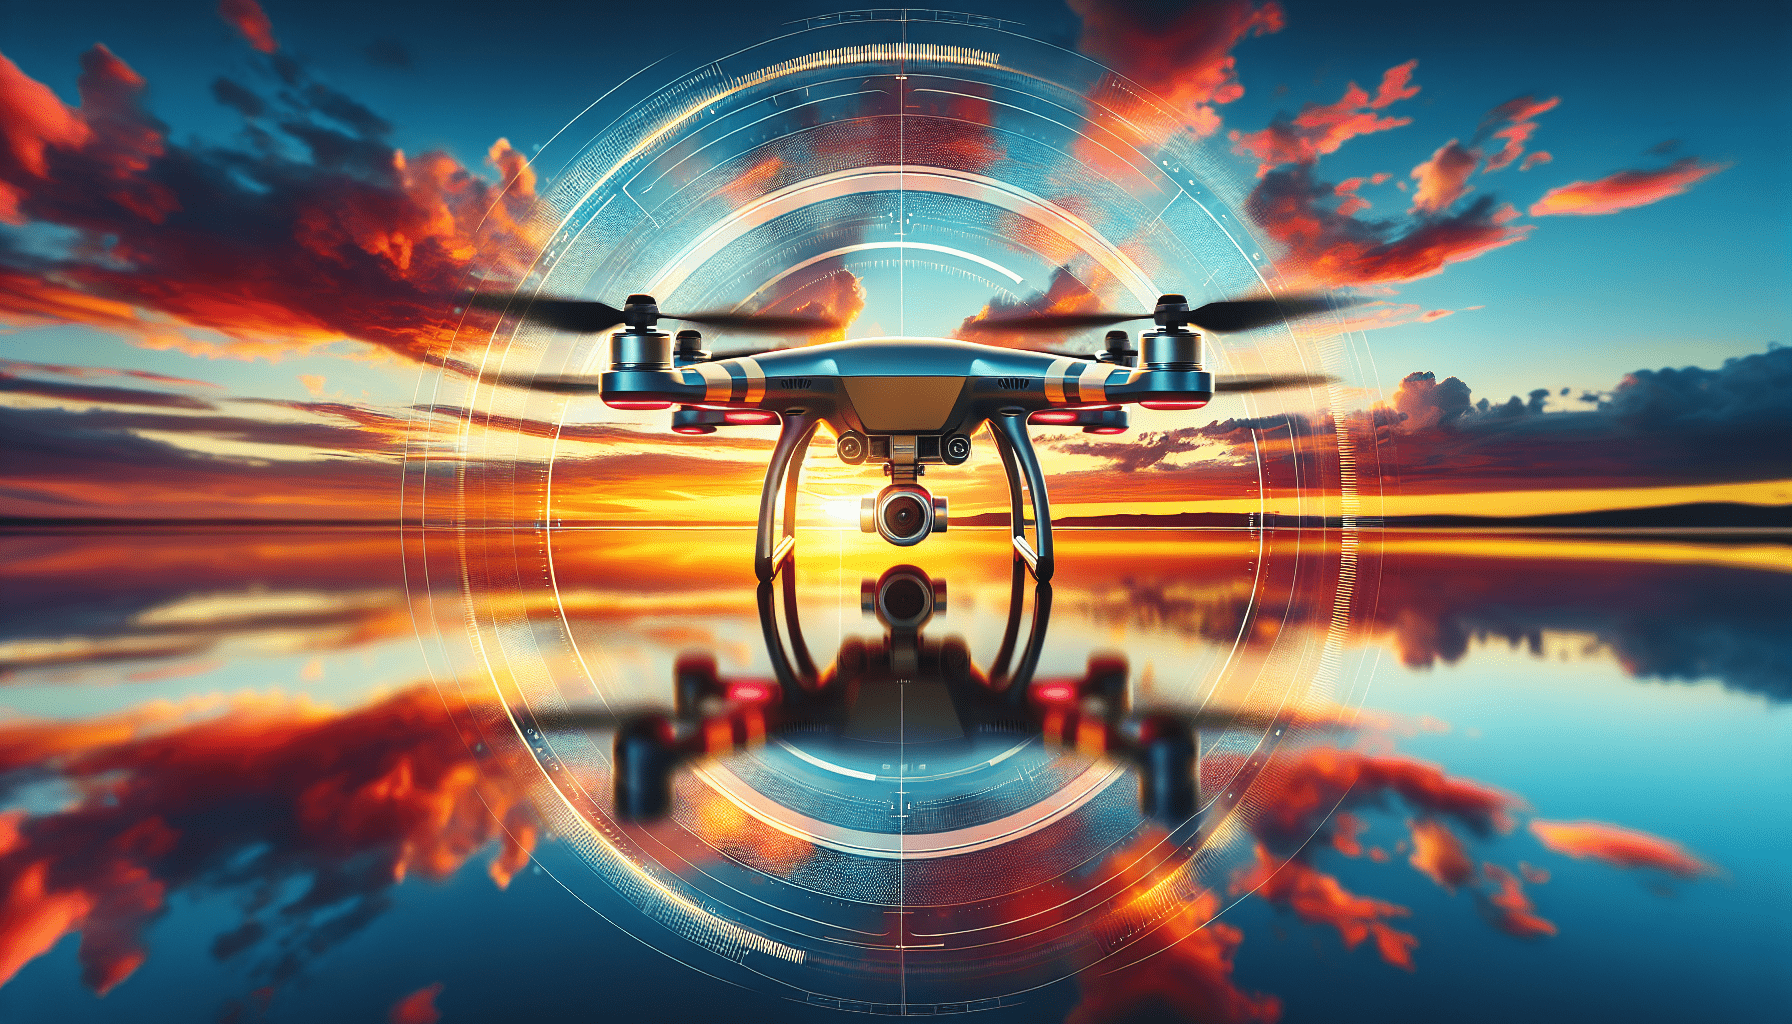 QuadAir Drone: The Perfect Balance of Range, Control, Durability, Battery Life, and Camera Quality